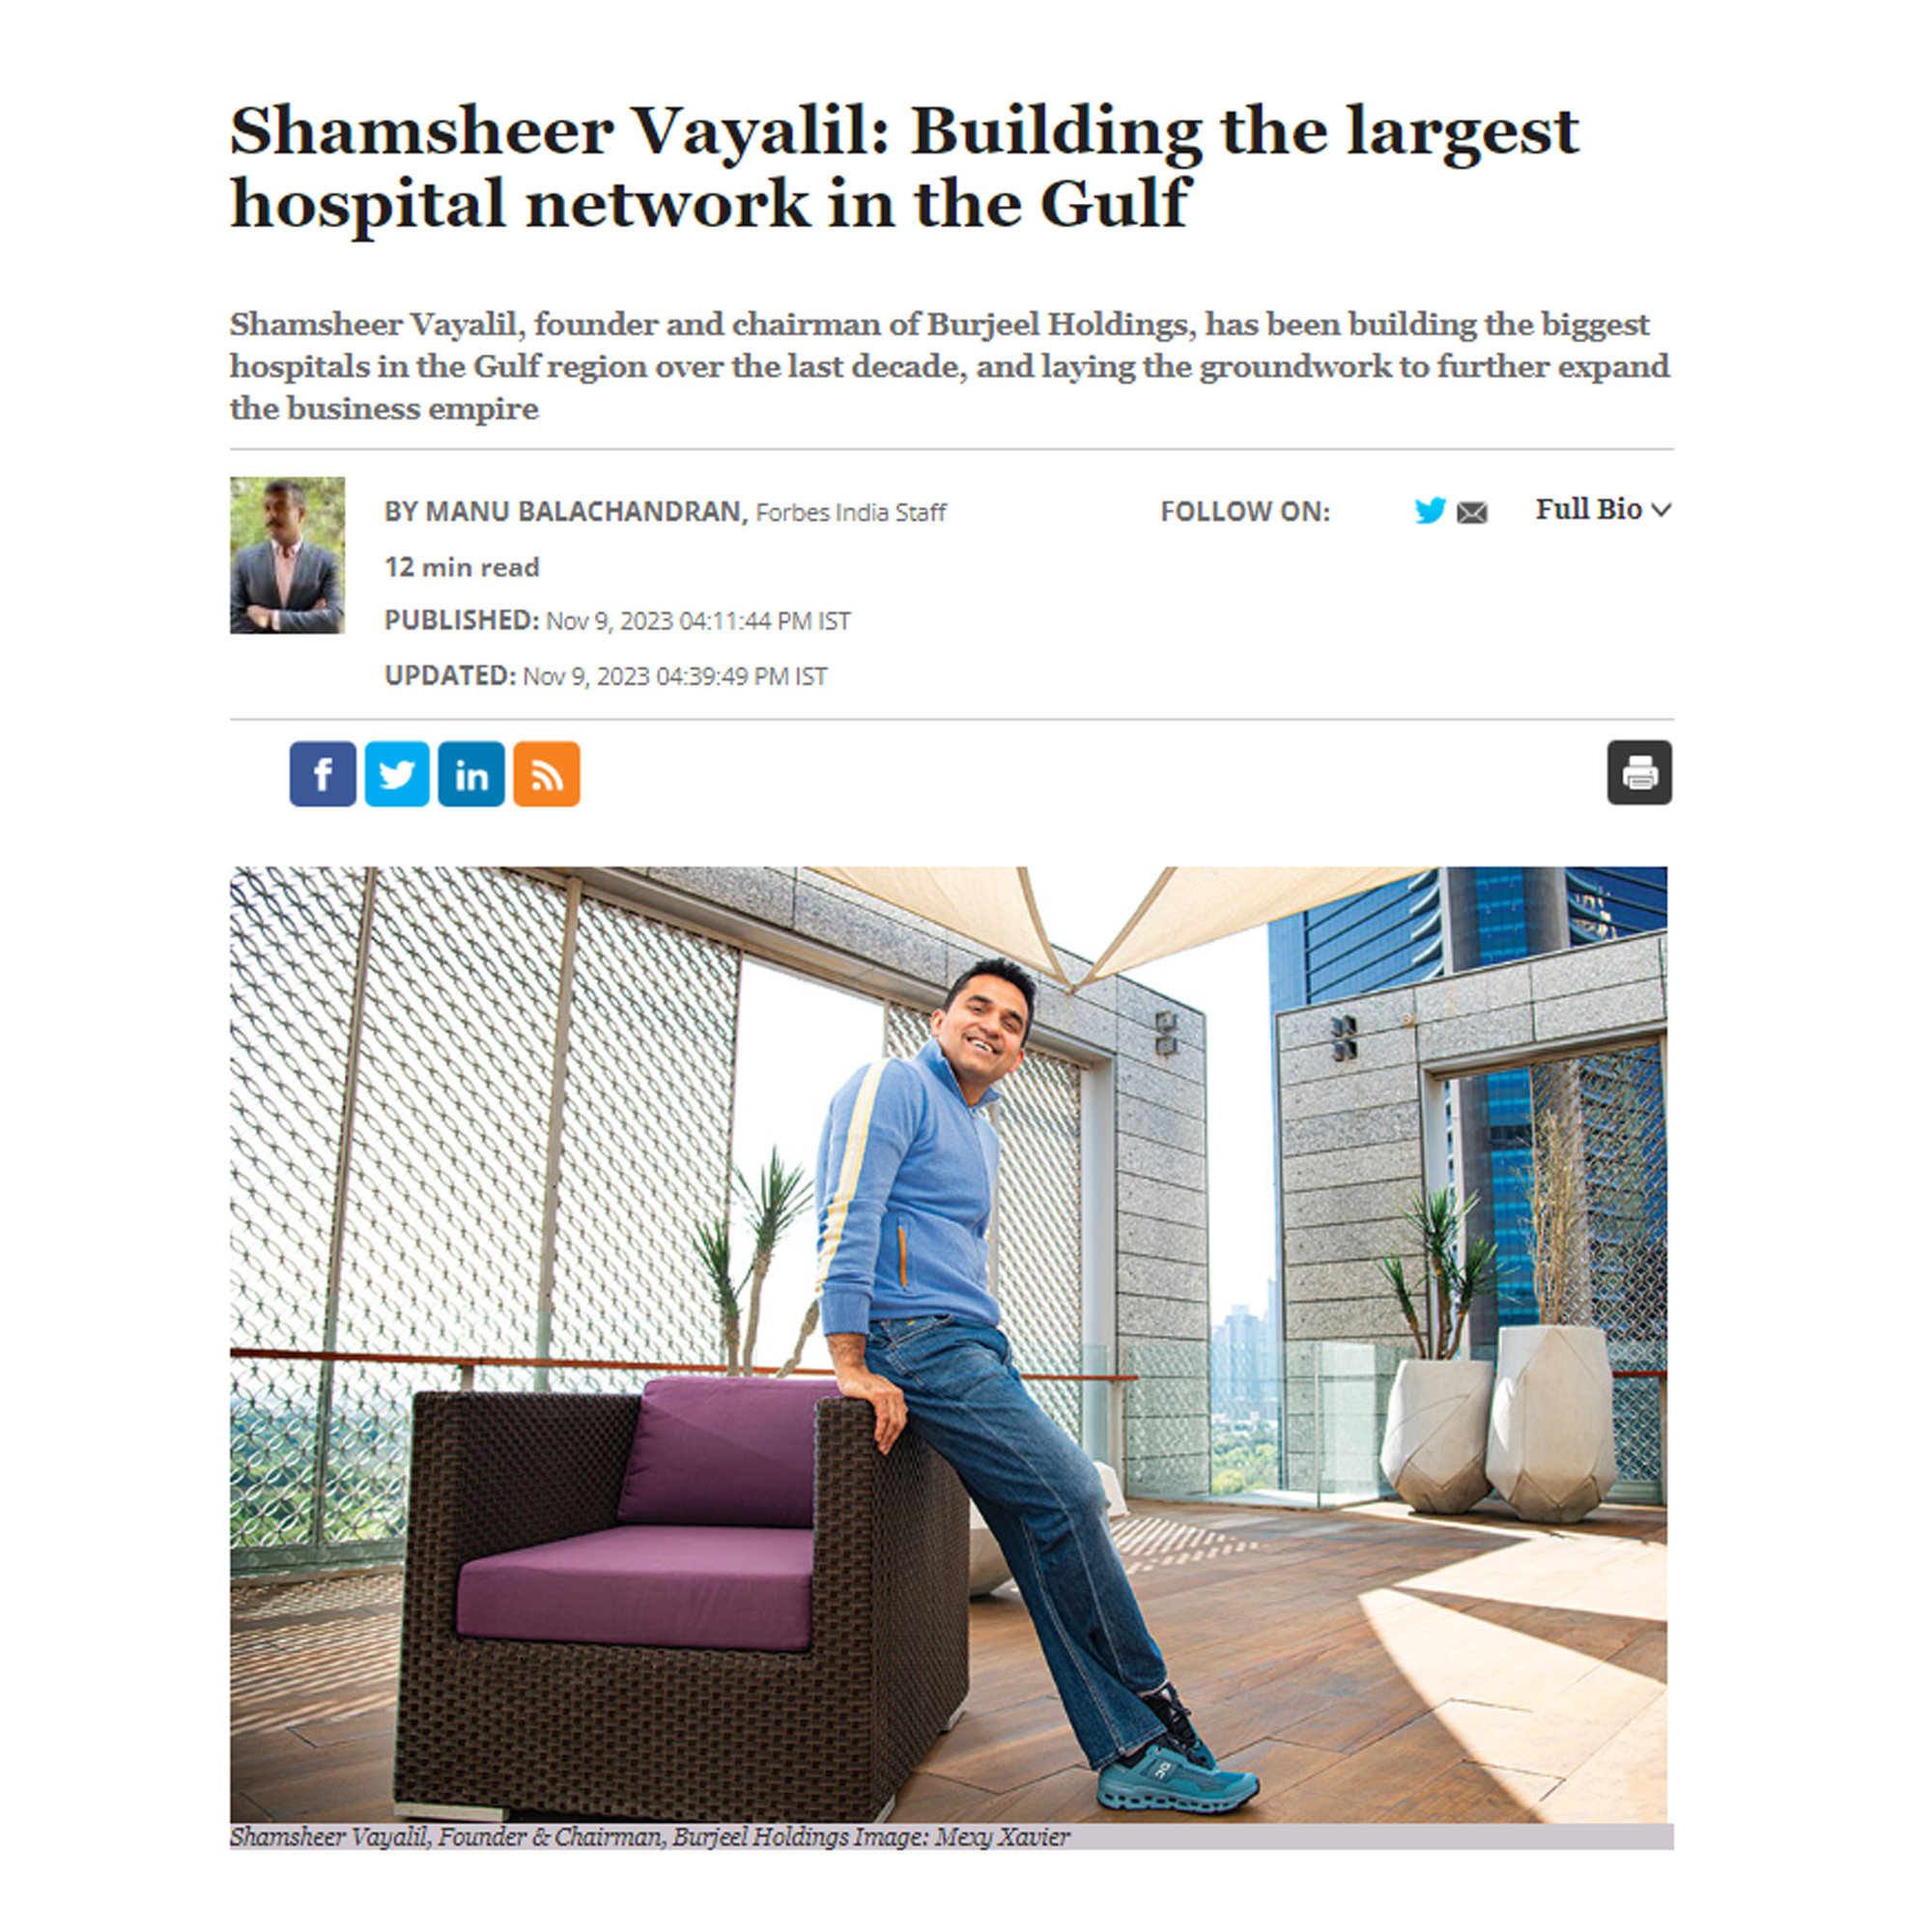 Dr Shamsheer Vayalil: Building the largest hospital network in the Gulf